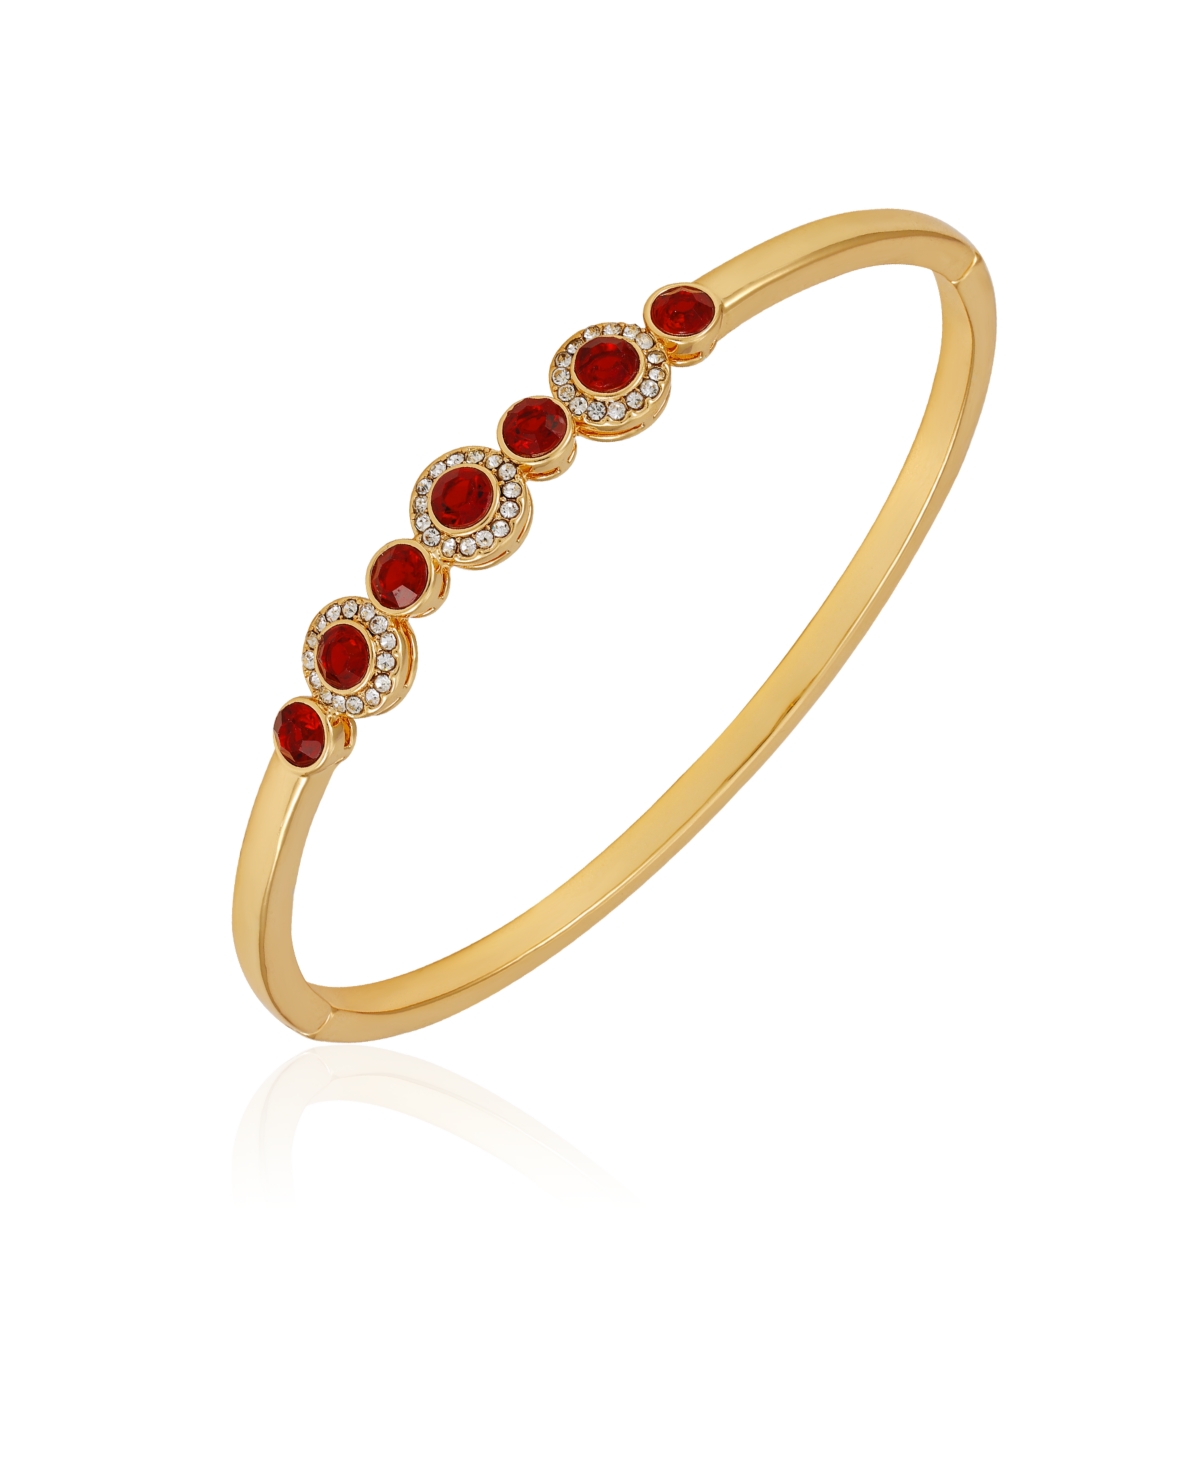 T Tahari Clear Glass Stone Hinged Cuff Bracelet In Red